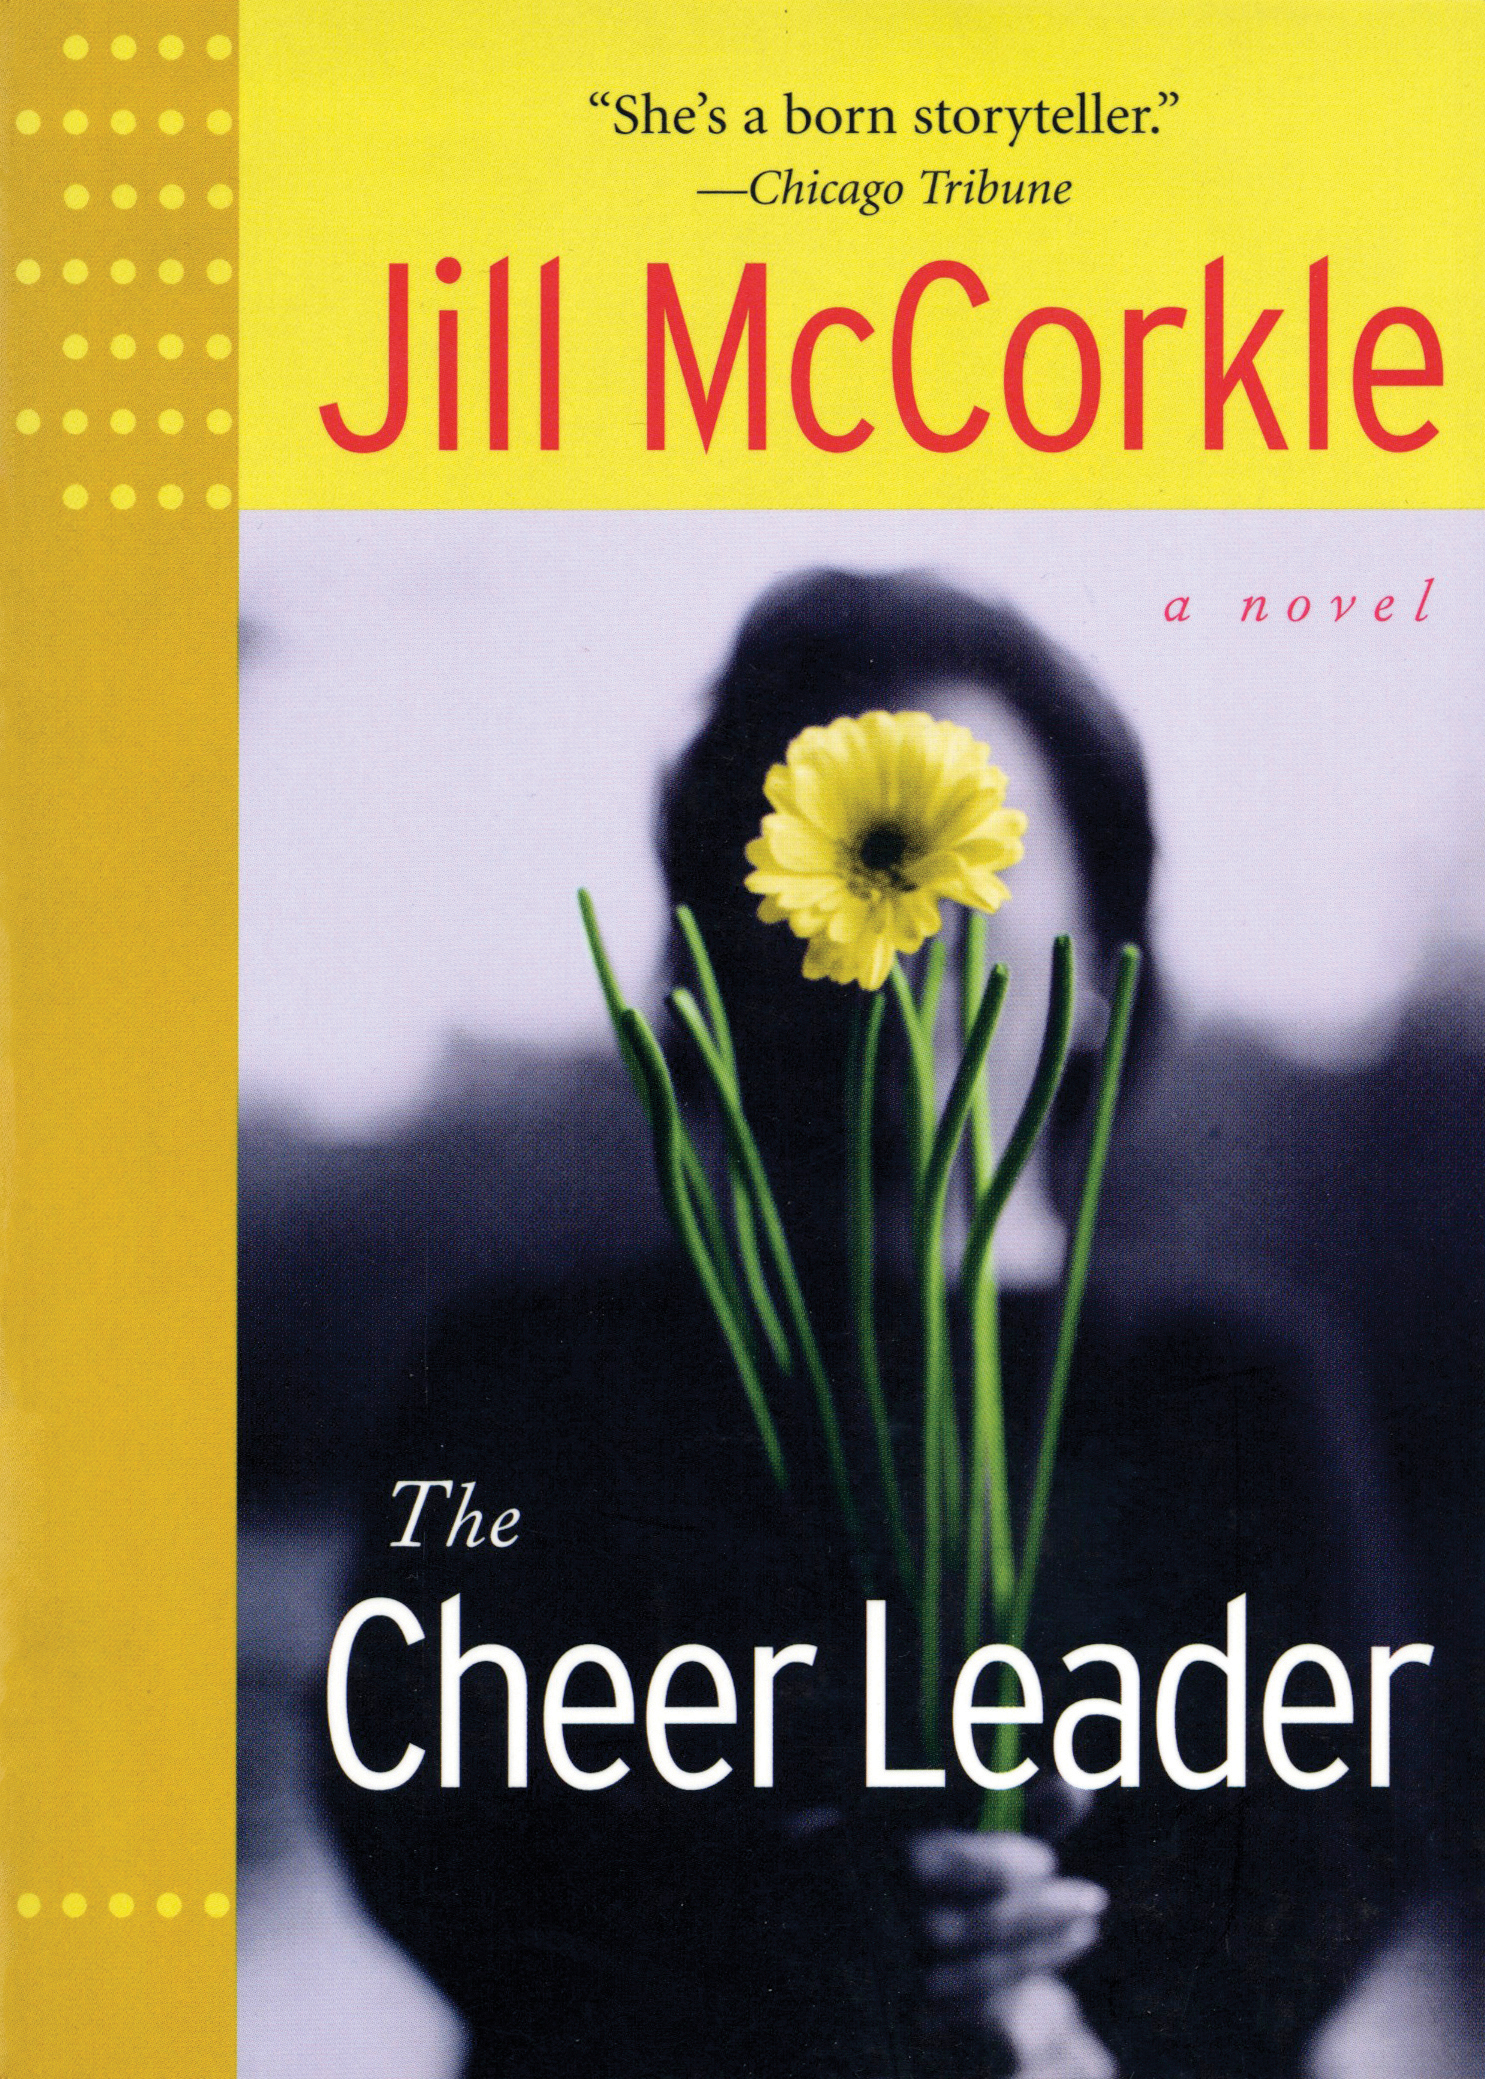 The Cheer Leader by Jill McCorkle Hachette Book Group image